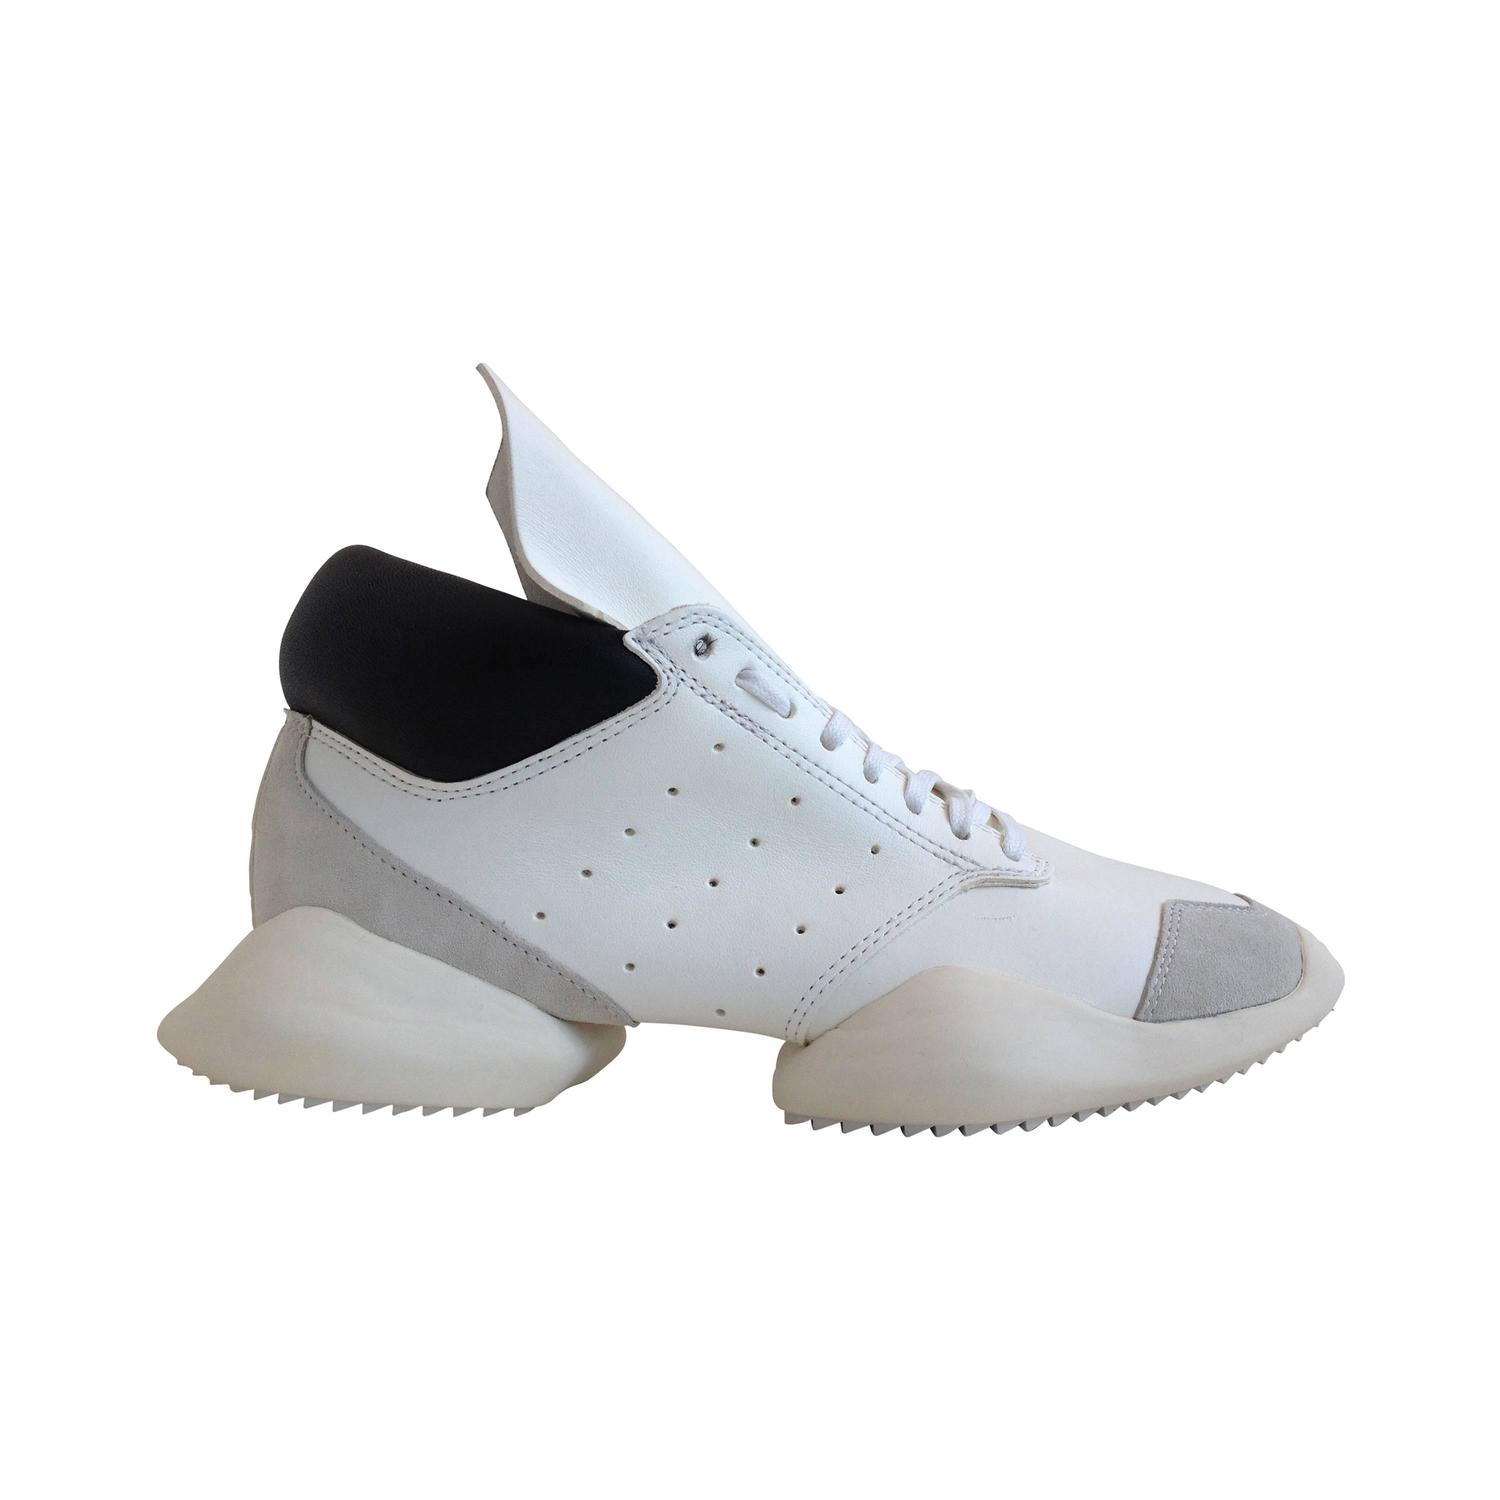 Rick Owens for Adidas White Puffy Sneakers For Sale at 1stdibs